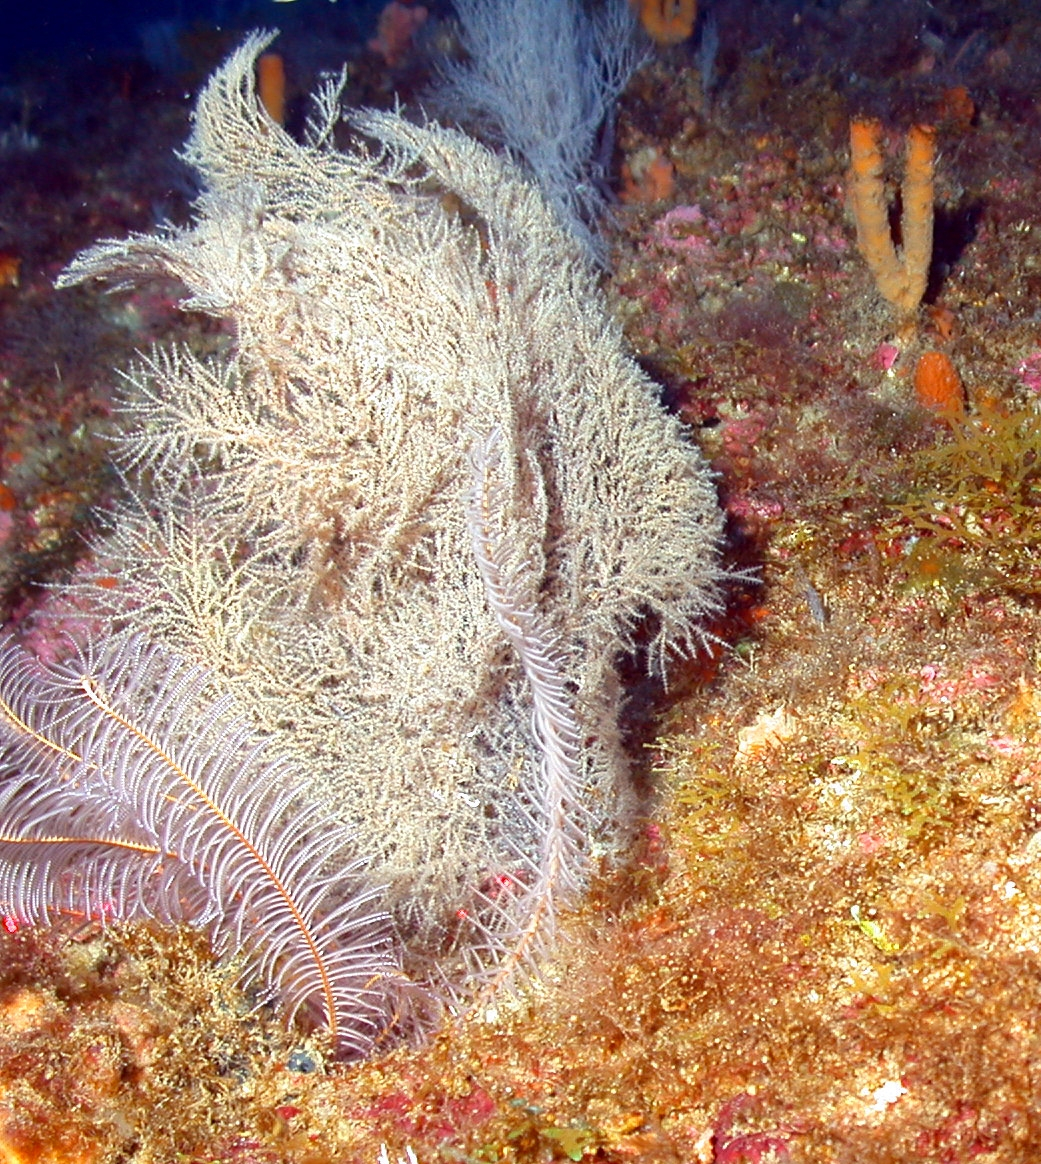 Crinoid in foreground